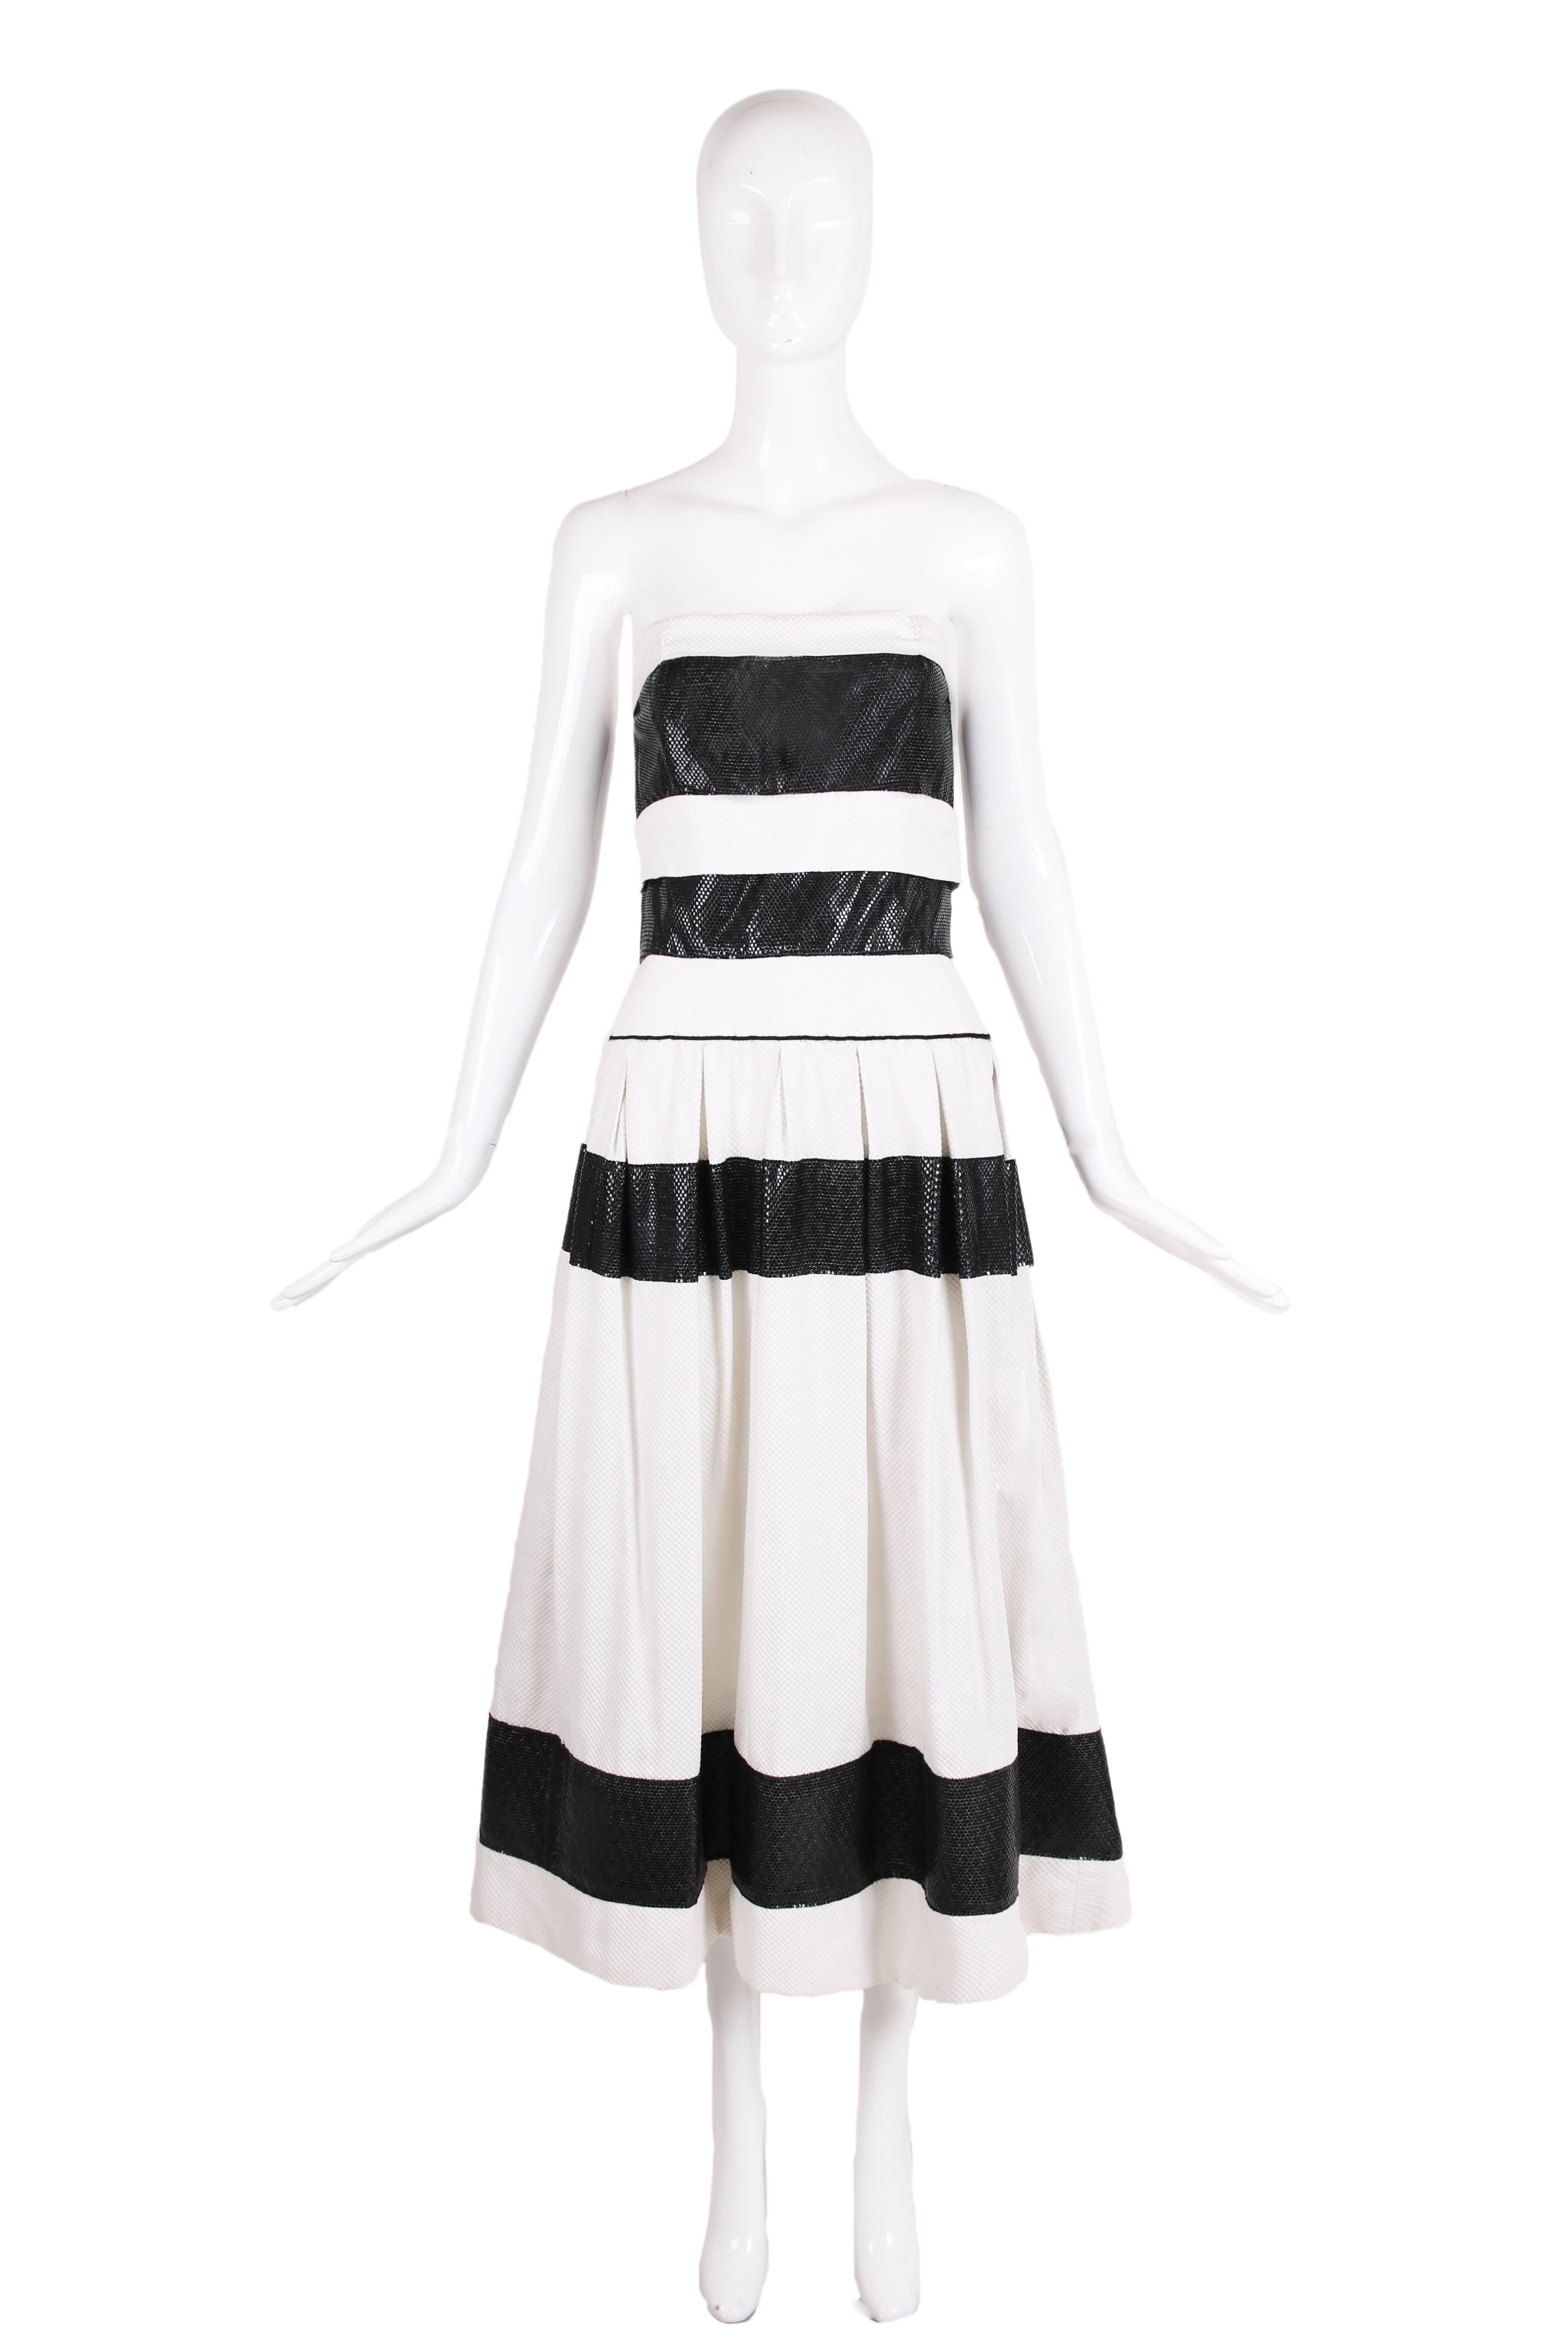 Vintage Chanel for Bergdorf Goodman white waffled cotton strapless cocktail dress with four contrasting black bands of a textured synthetic material. There is boning at the interior bodice, a nipped waist and full skirt with box pleats off a drop at